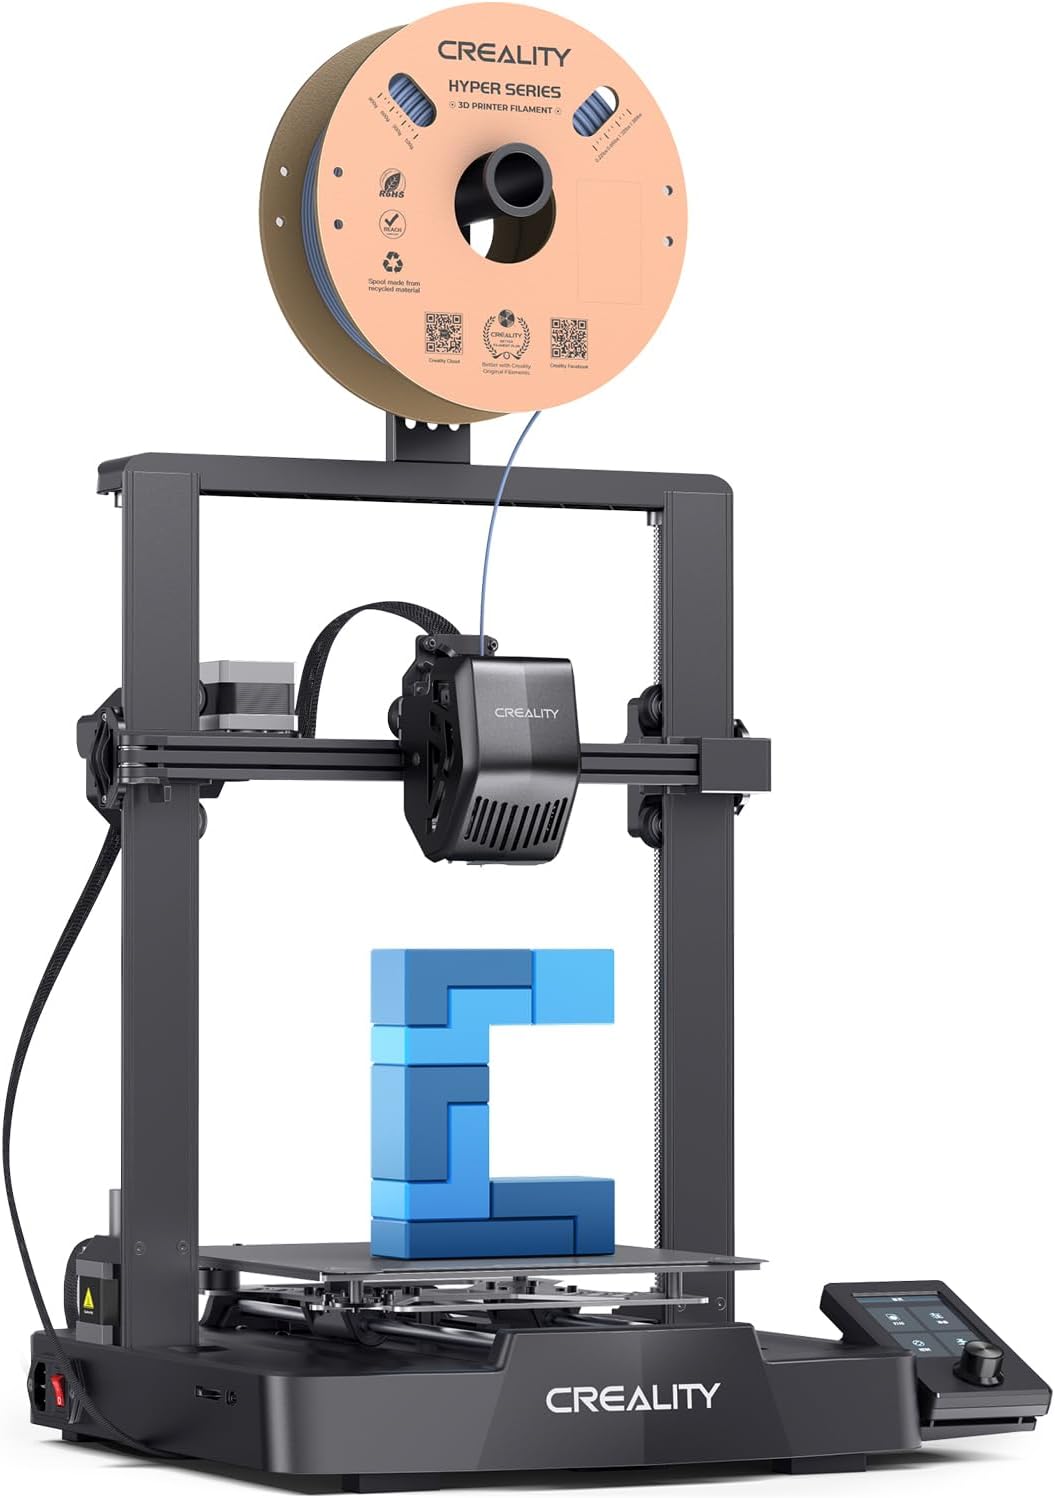 official-creality-3d-printers-ender-3-v3-se-250mms-fast-printing-speed-3d-printing-machine-with-cr-touch-sprite-direct-e Official Creality 3D Printer Ender 3 V3 SE Review